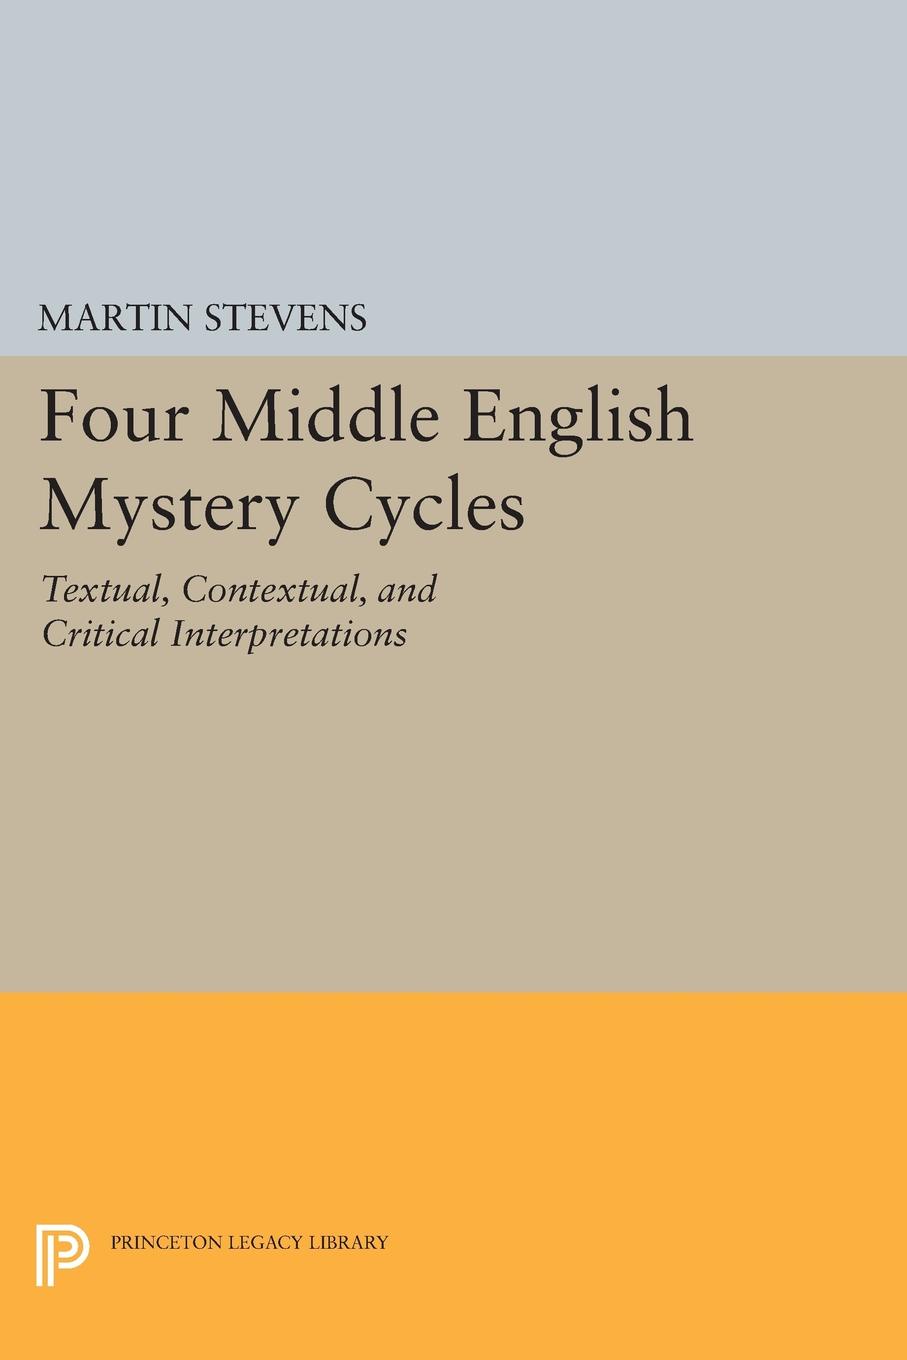 Four Middle English Mystery Cycles. Textual, Contextual, and Critical Interpretations